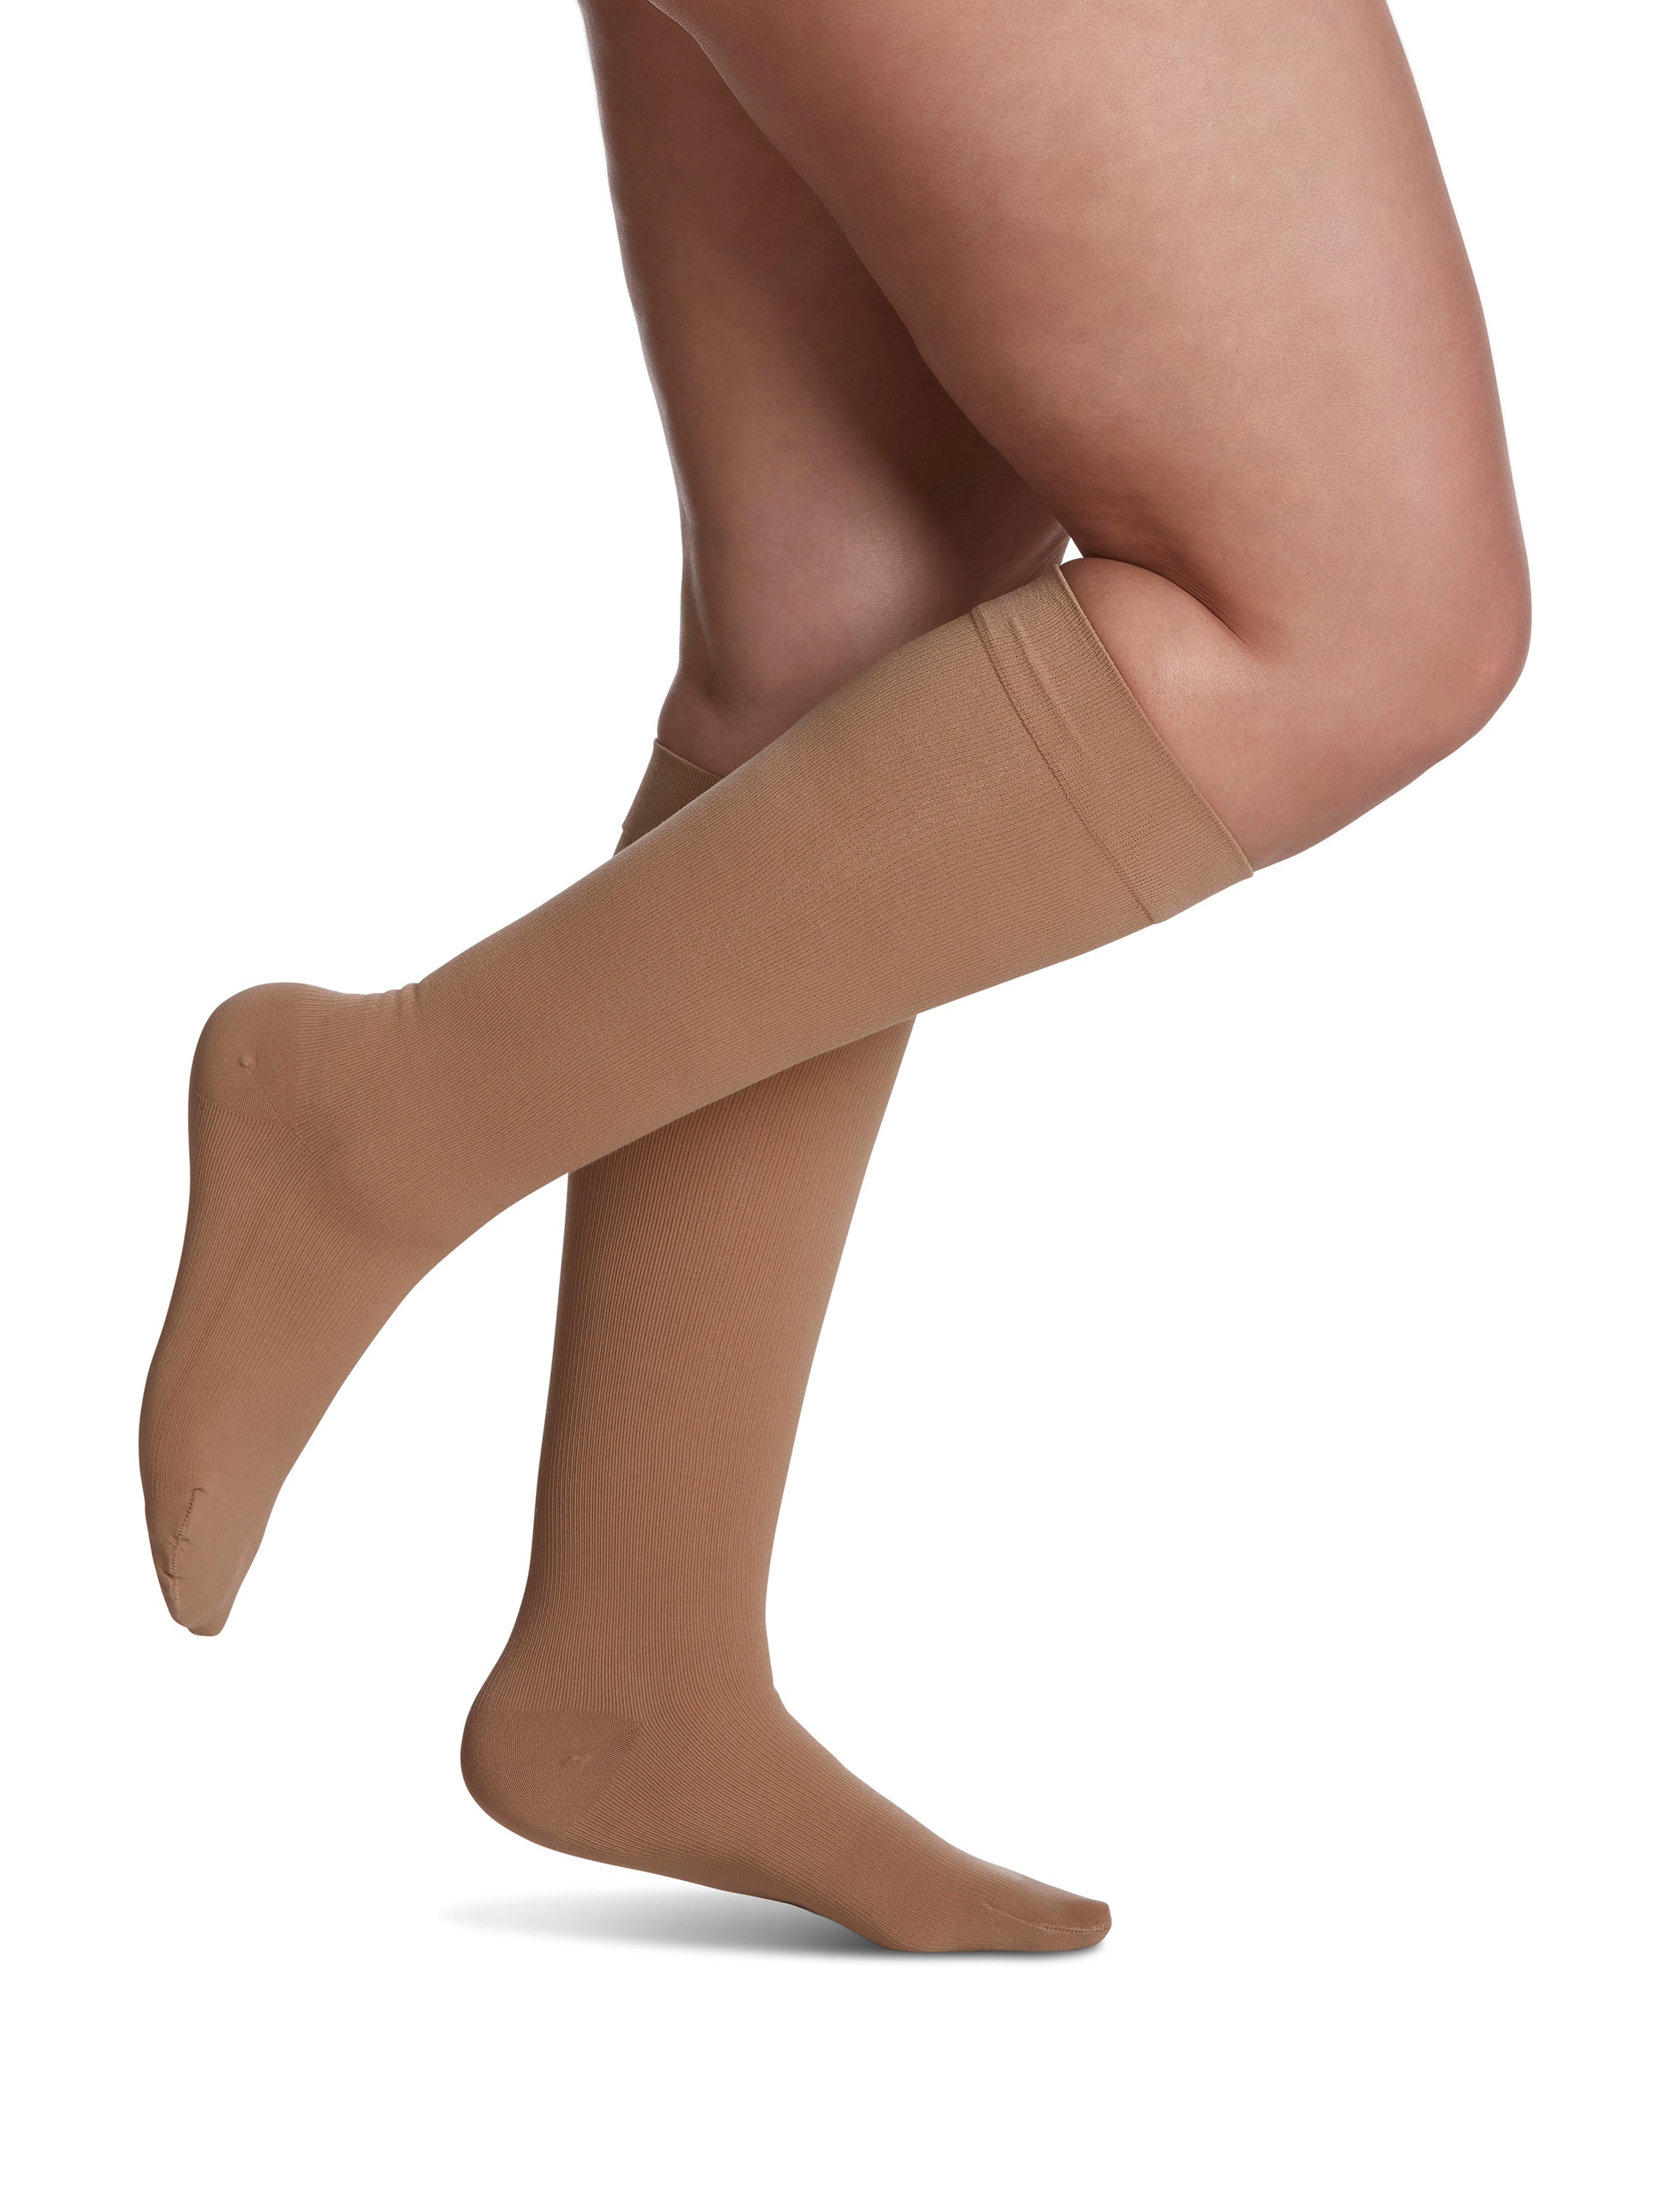 Woman wearing Sigvaris Essential Cotton compression calf in the color Light Beige